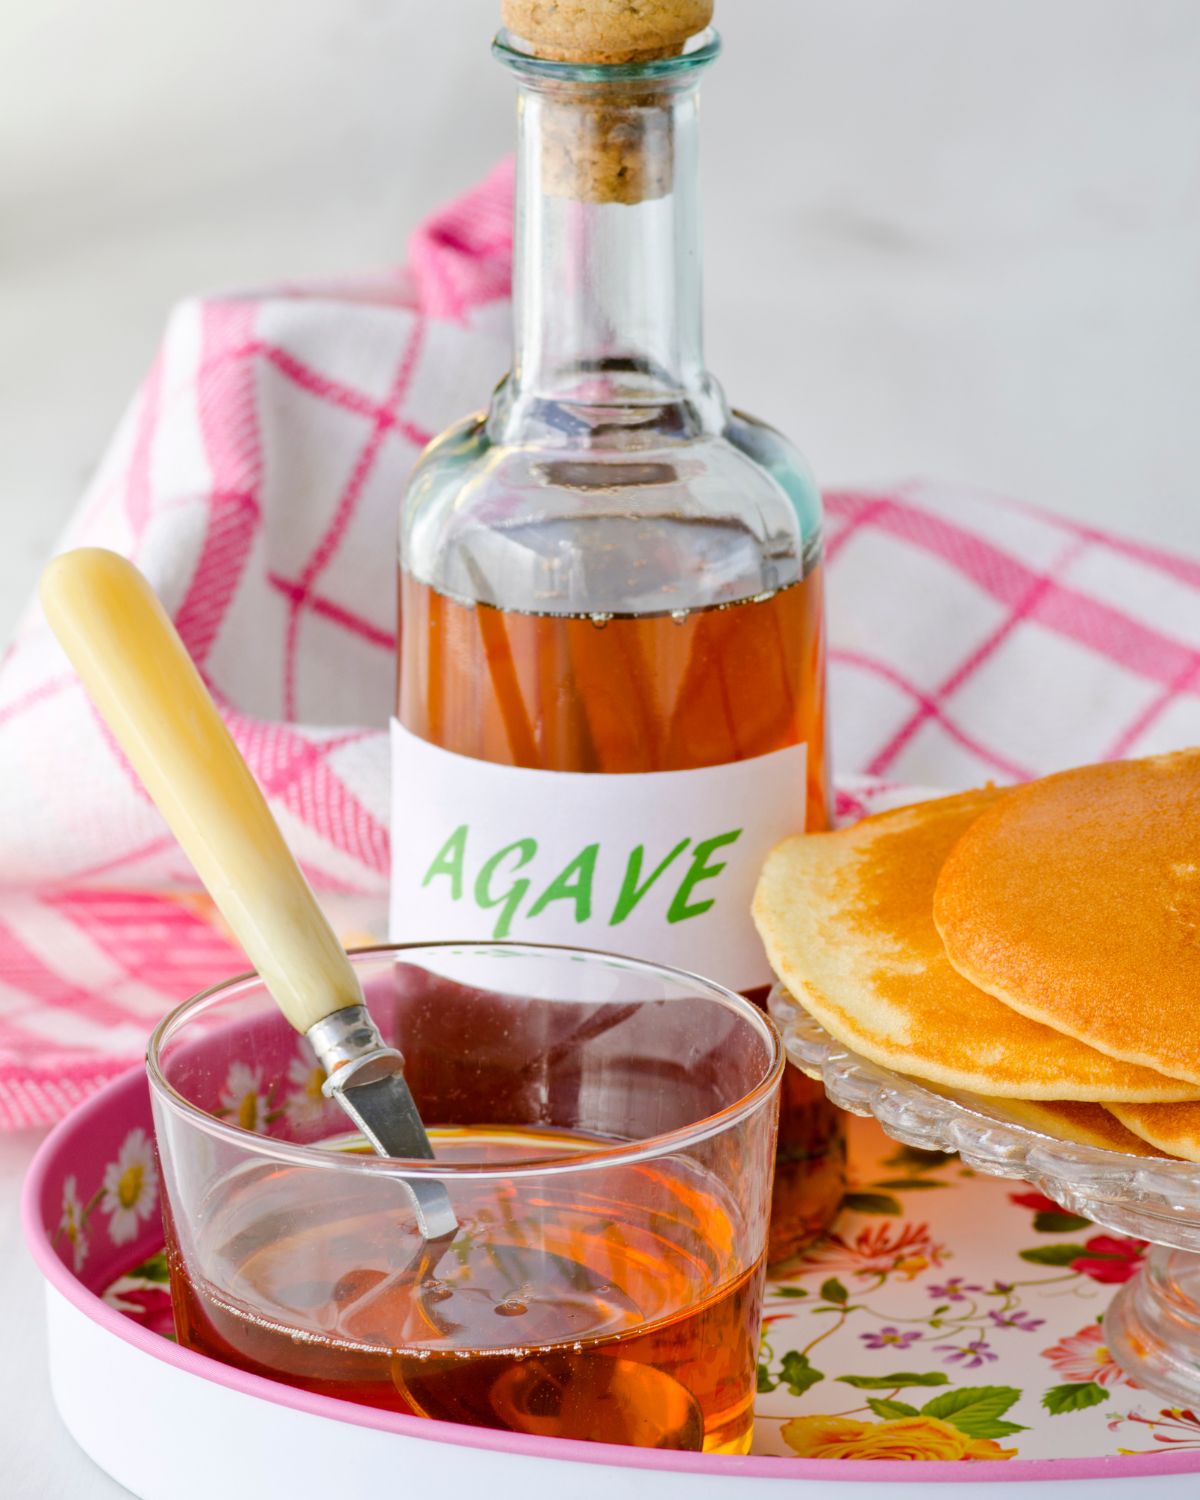 Agave syrup in a bottle next to pancakes.